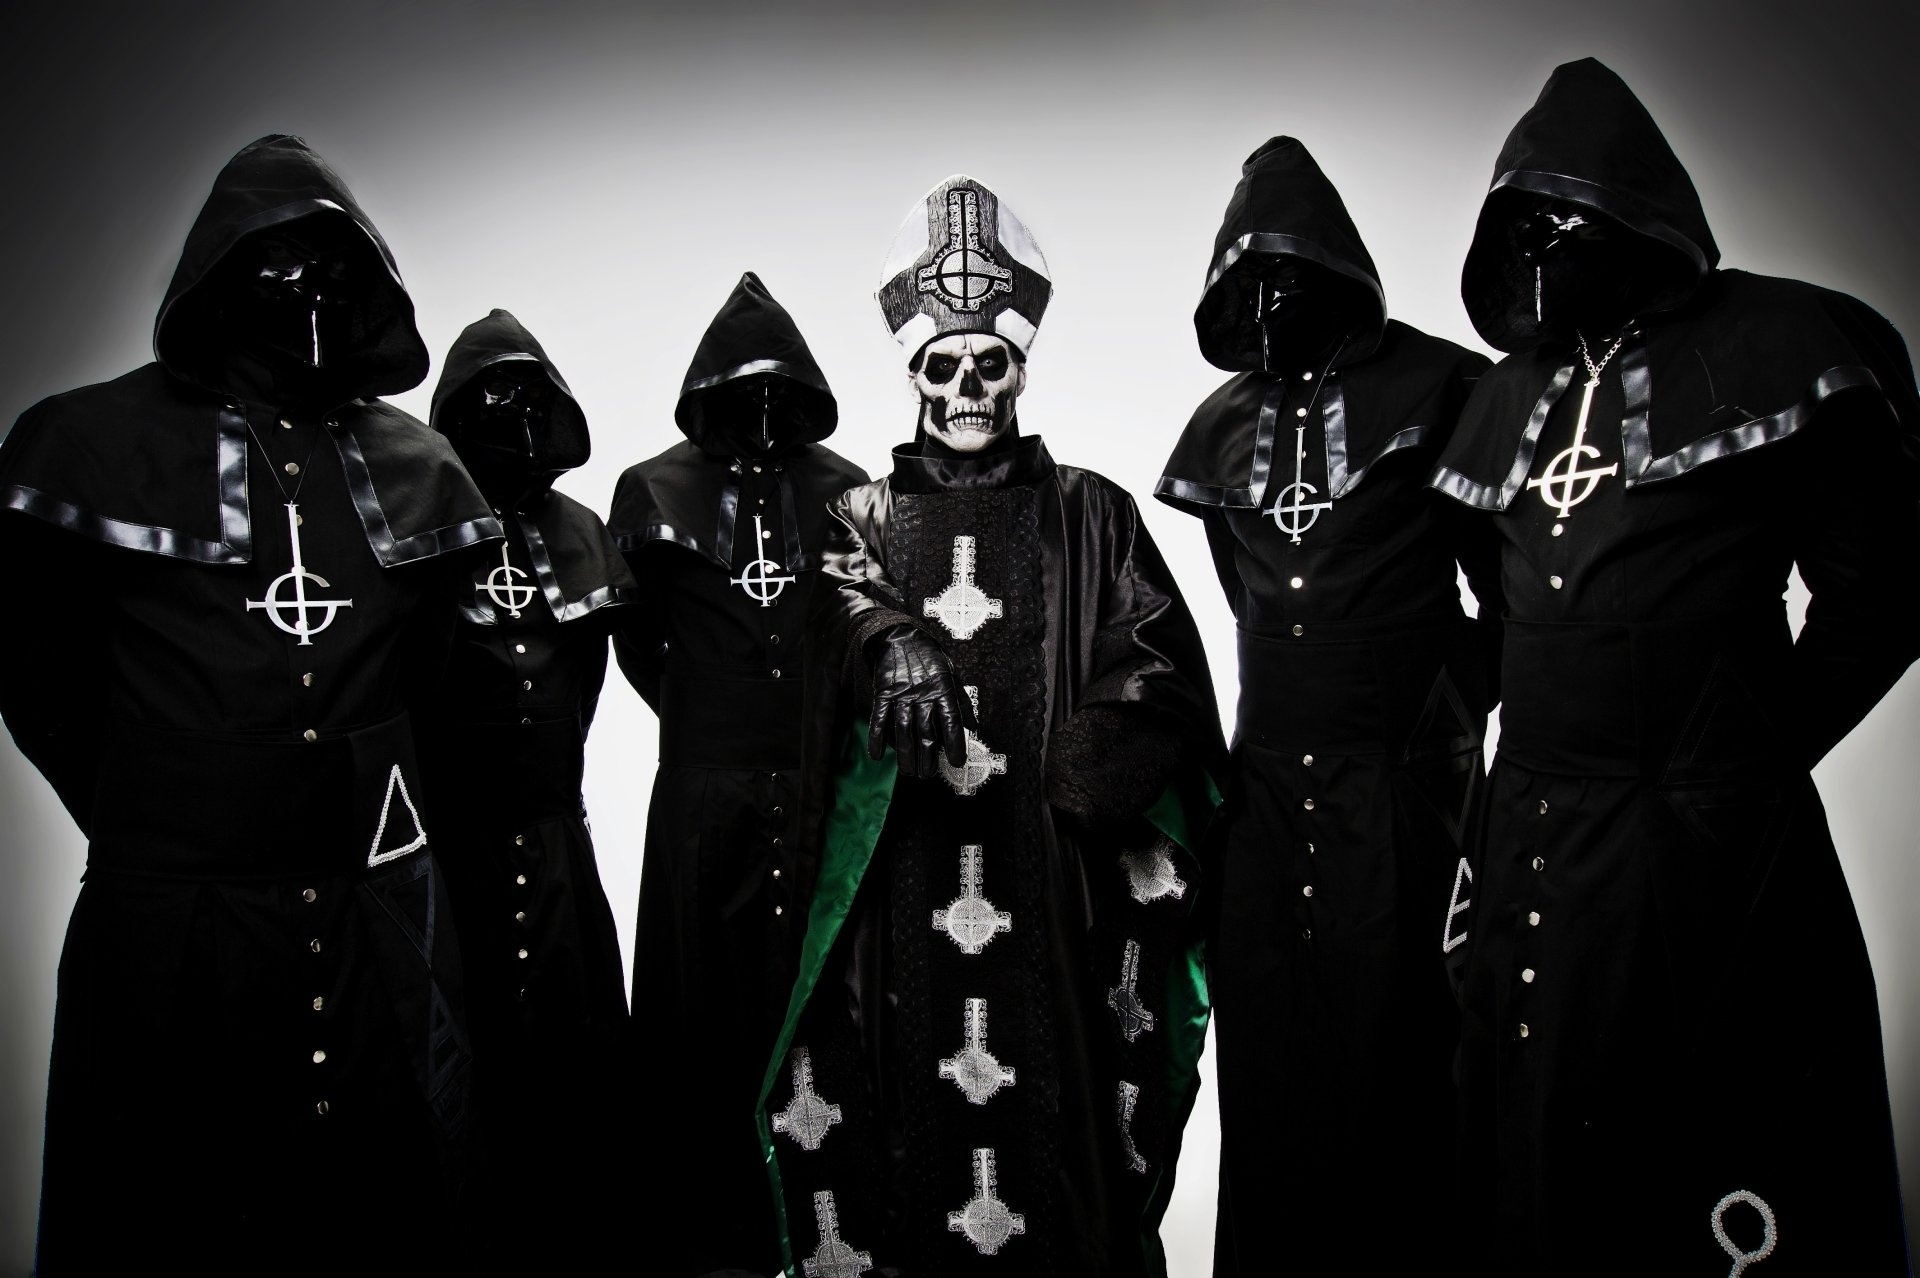 Music Band: Ghost, A Swedish rock group formed in Linköping in 2006, Papa Emeritus IV. 1920x1280 HD Wallpaper.